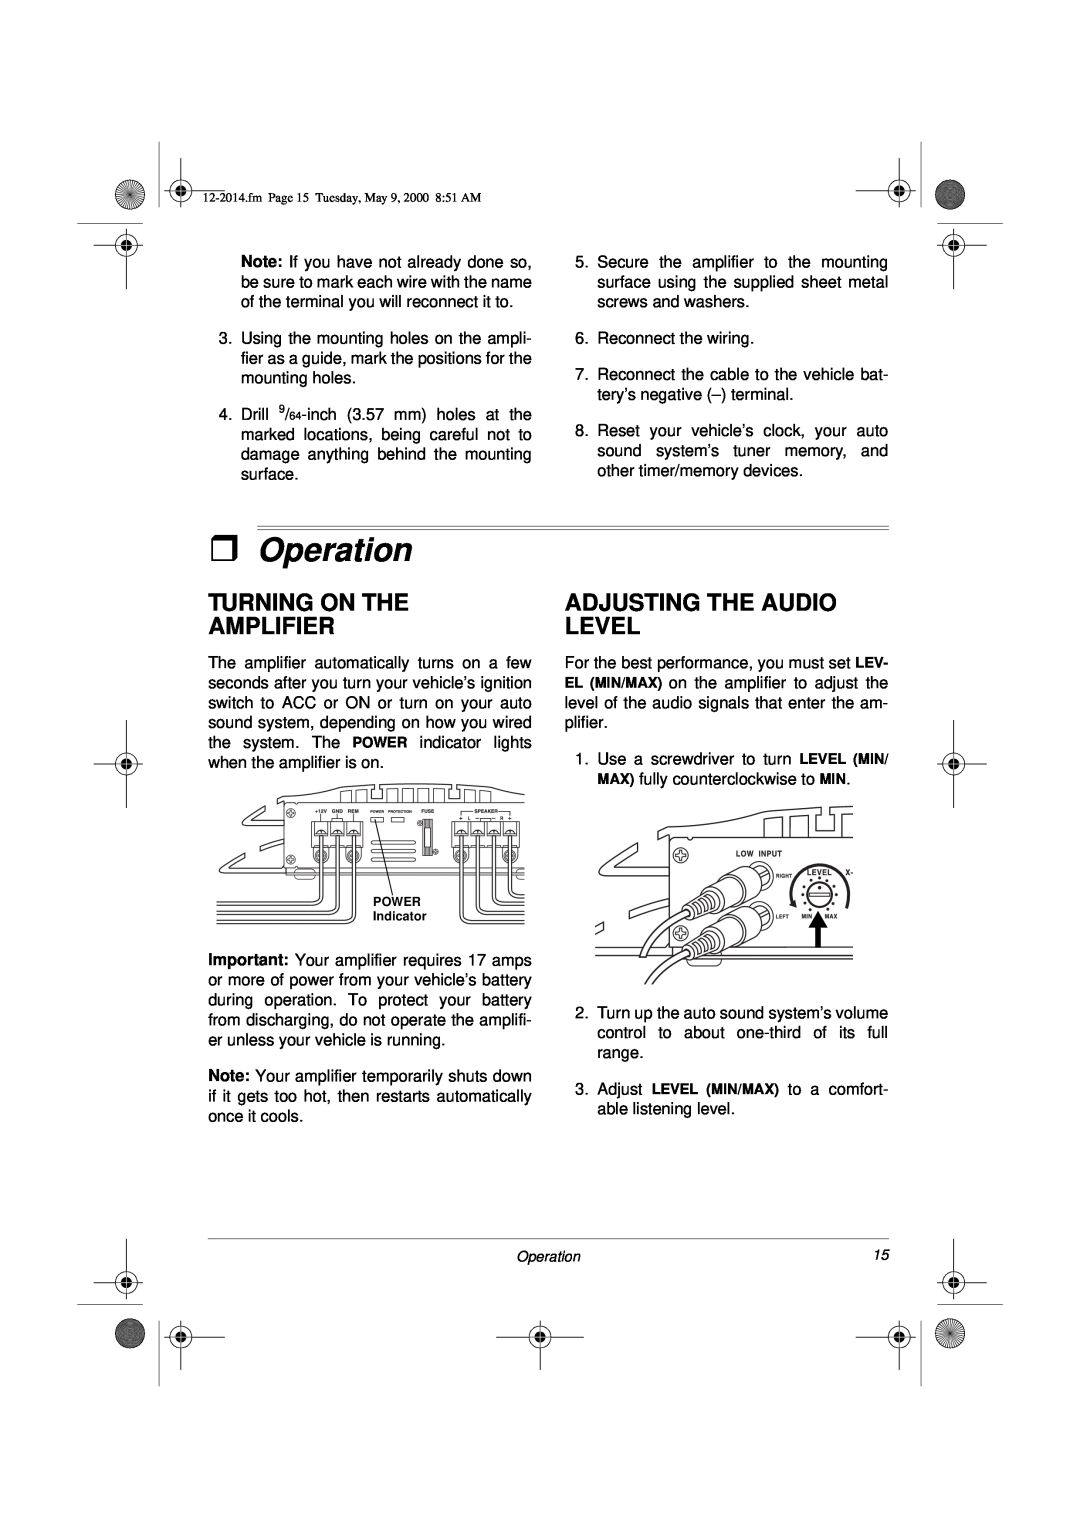 Radio Shack XL-110 owner manual ˆOperation, Turning On The Amplifier, Adjusting The Audio Level 